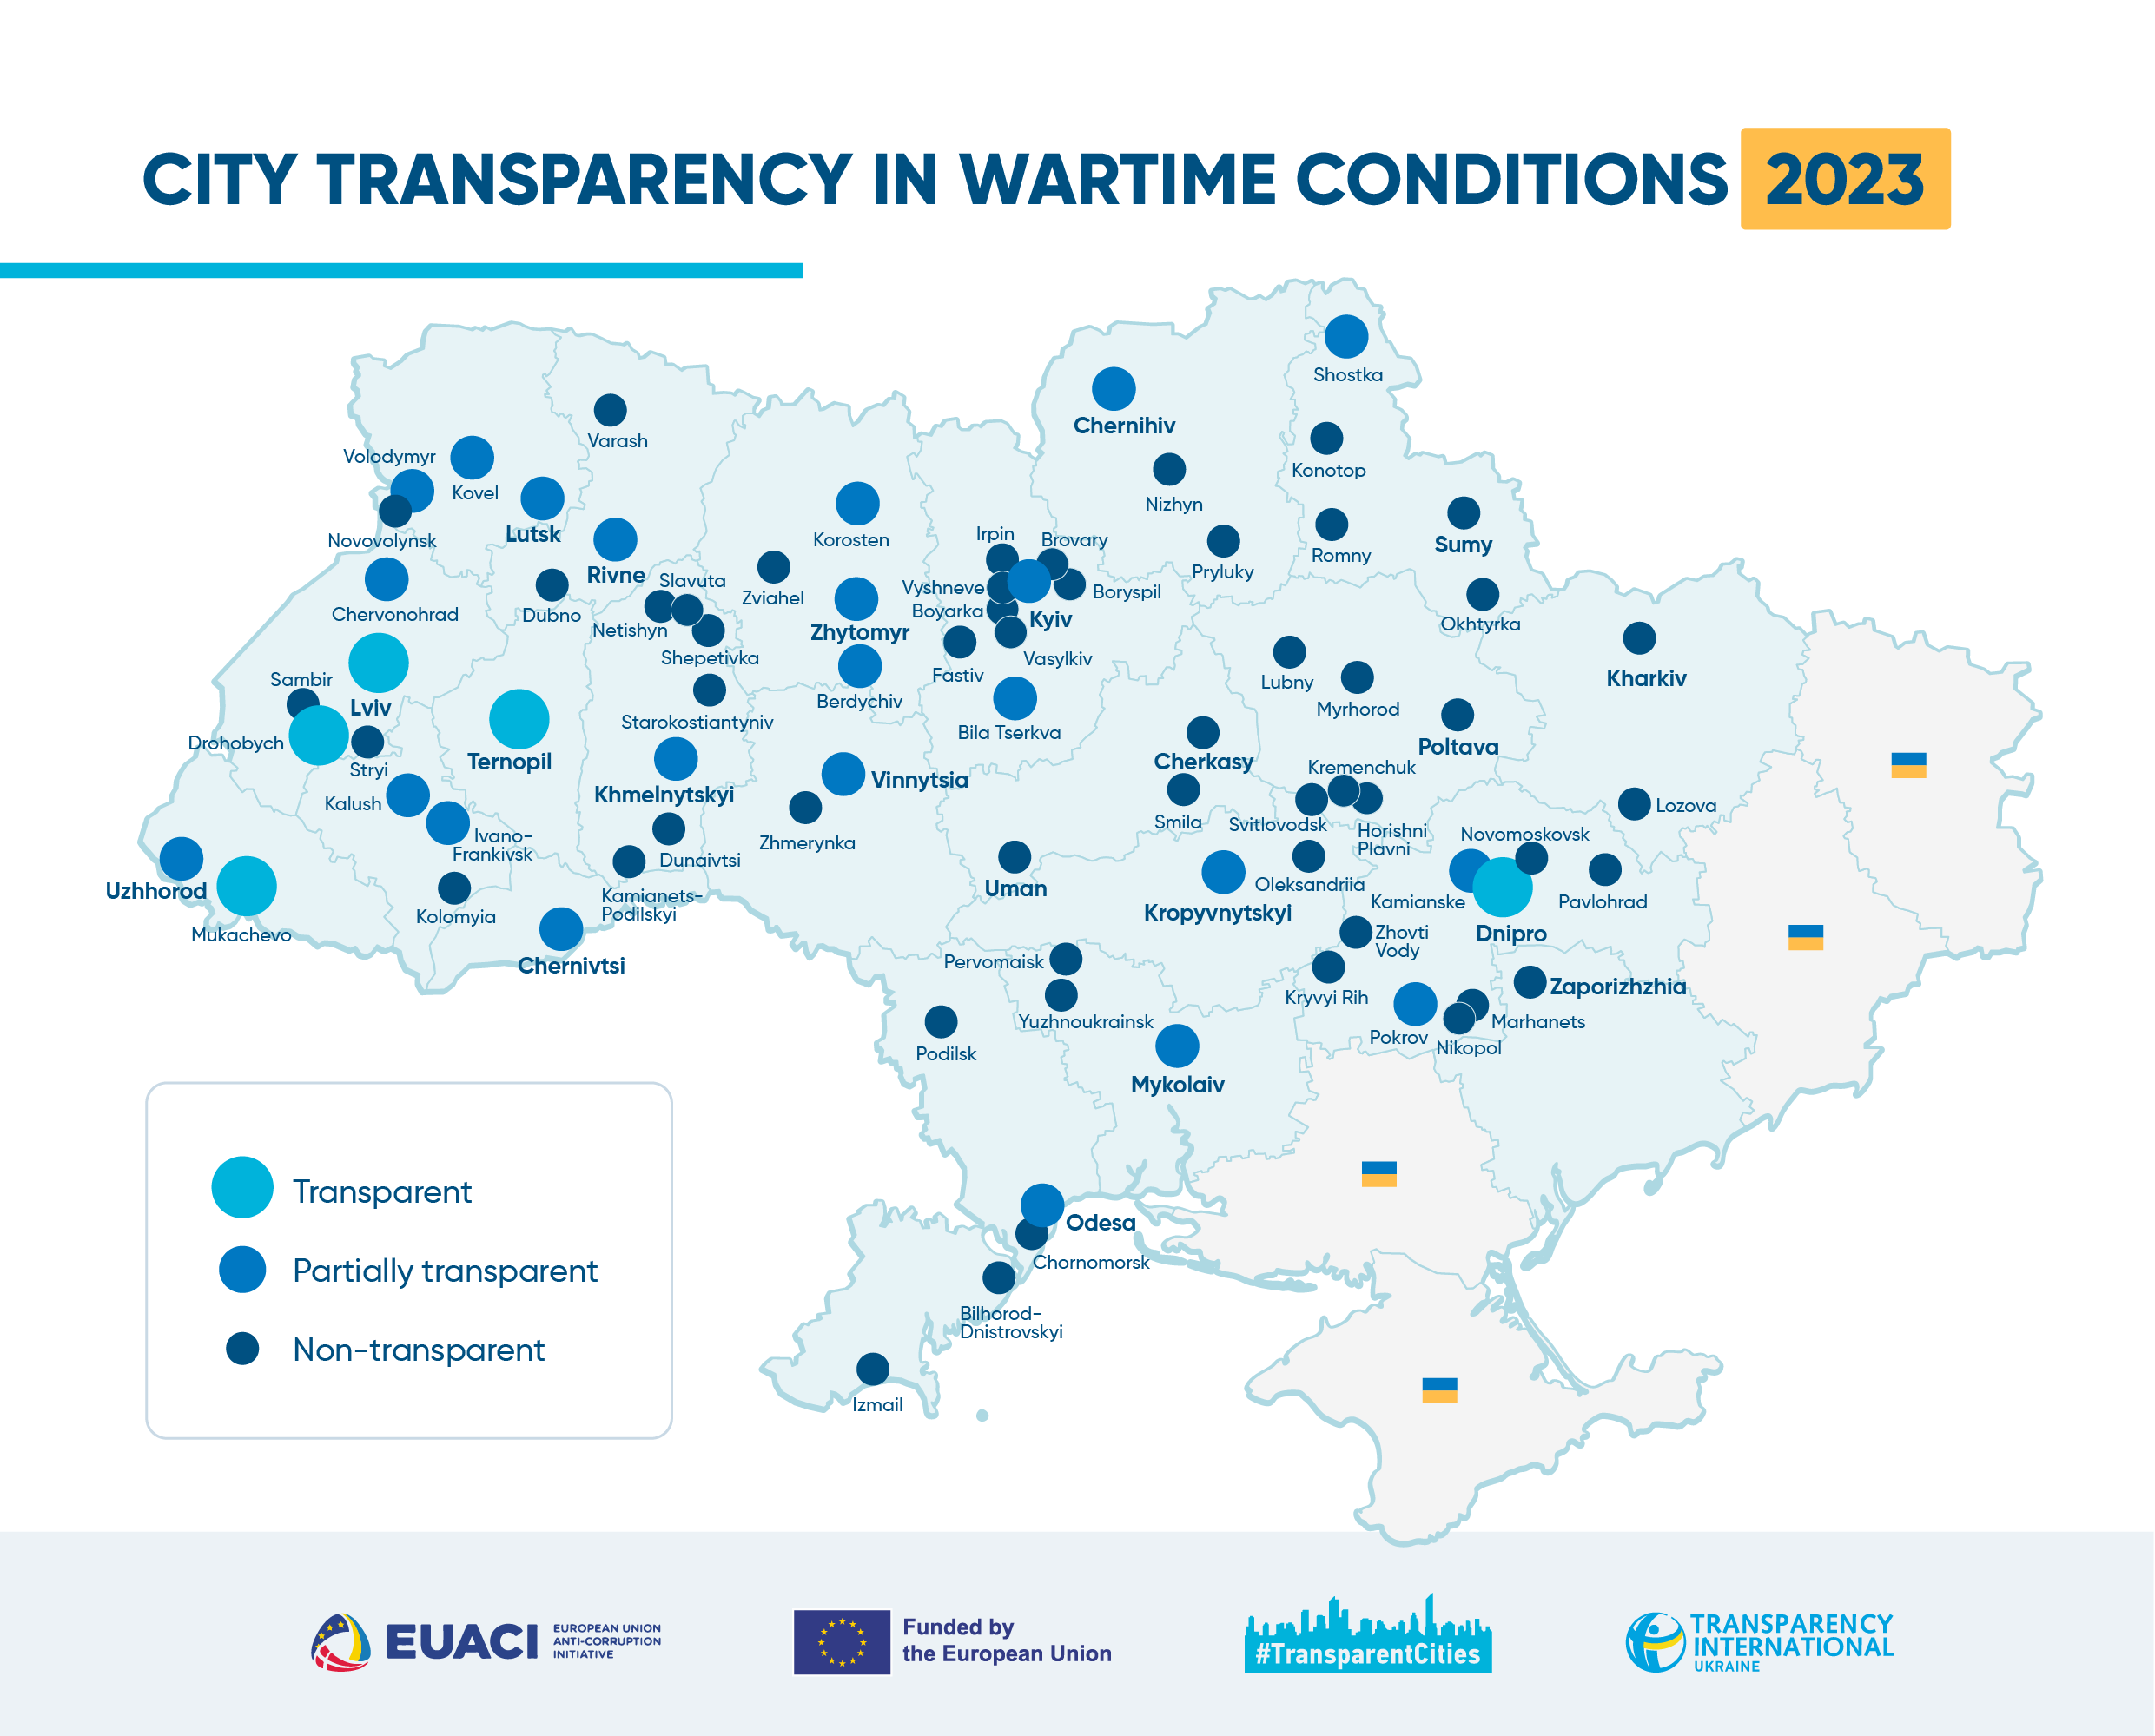 Dnipro, Drohobych, Lviv, Mukachevo, and Ternopil are recognized as transparent in 2023 — Transparency International Ukraine